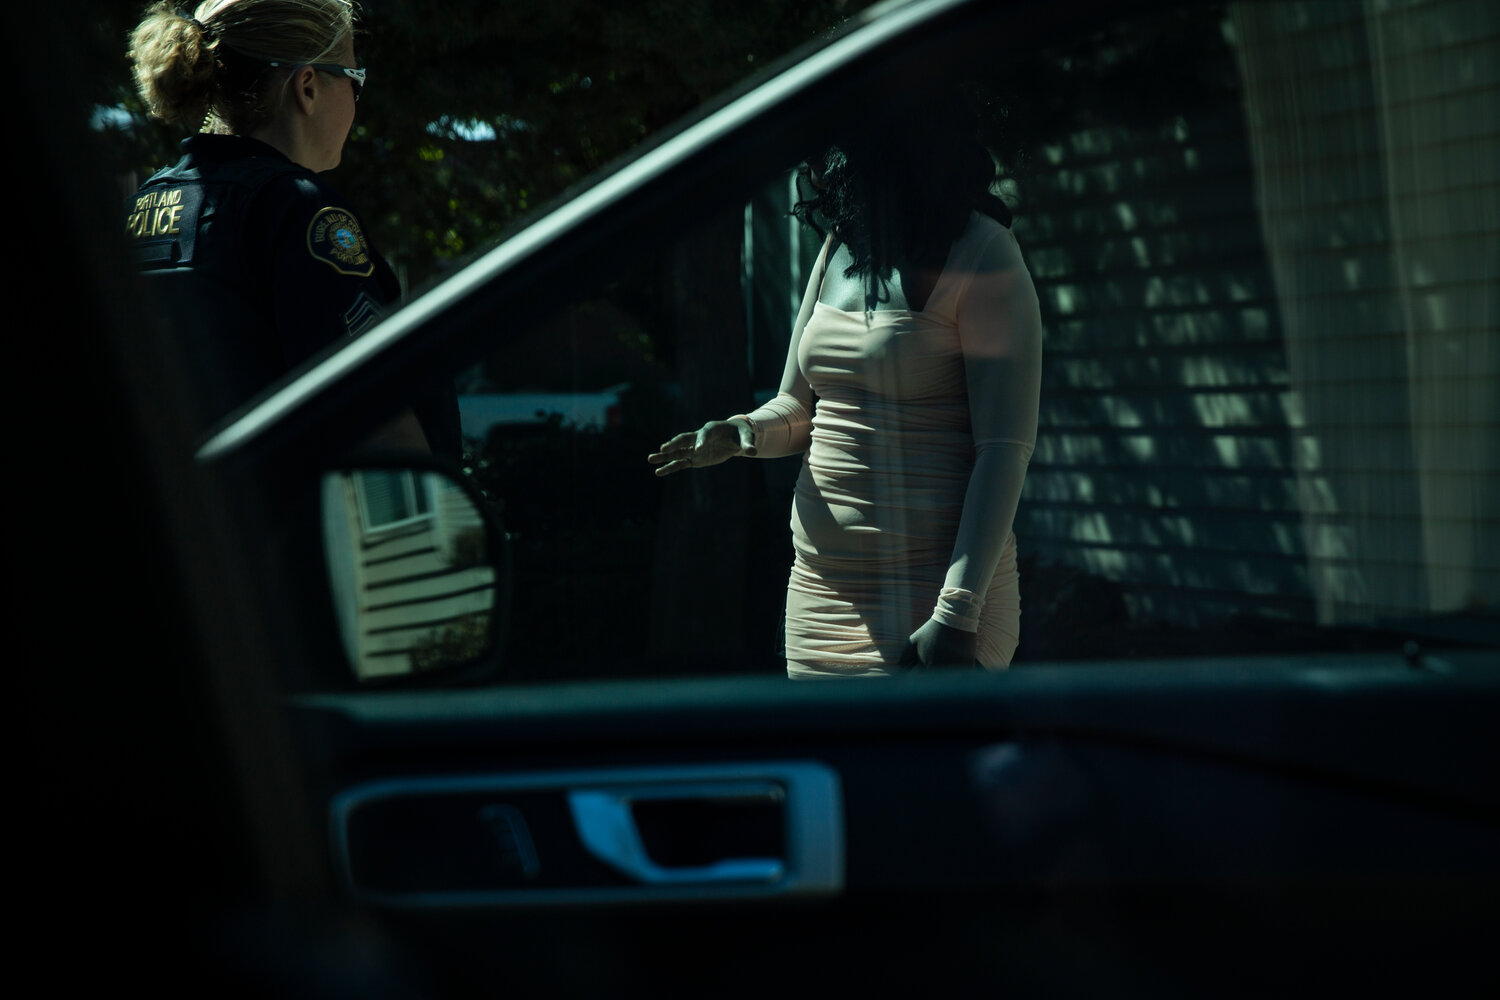 Police Sgt. Kristi Butcher, supervisor of the Portland Police Bureau’s Human Trafficking Unit, gathers information from an adult who she suspects is a victim of sex trafficking during a directed patrol mission in July. Butcher says many adult trafficking victims were first trafficked as minors. (Moriah Ratner/InvestigateWest)